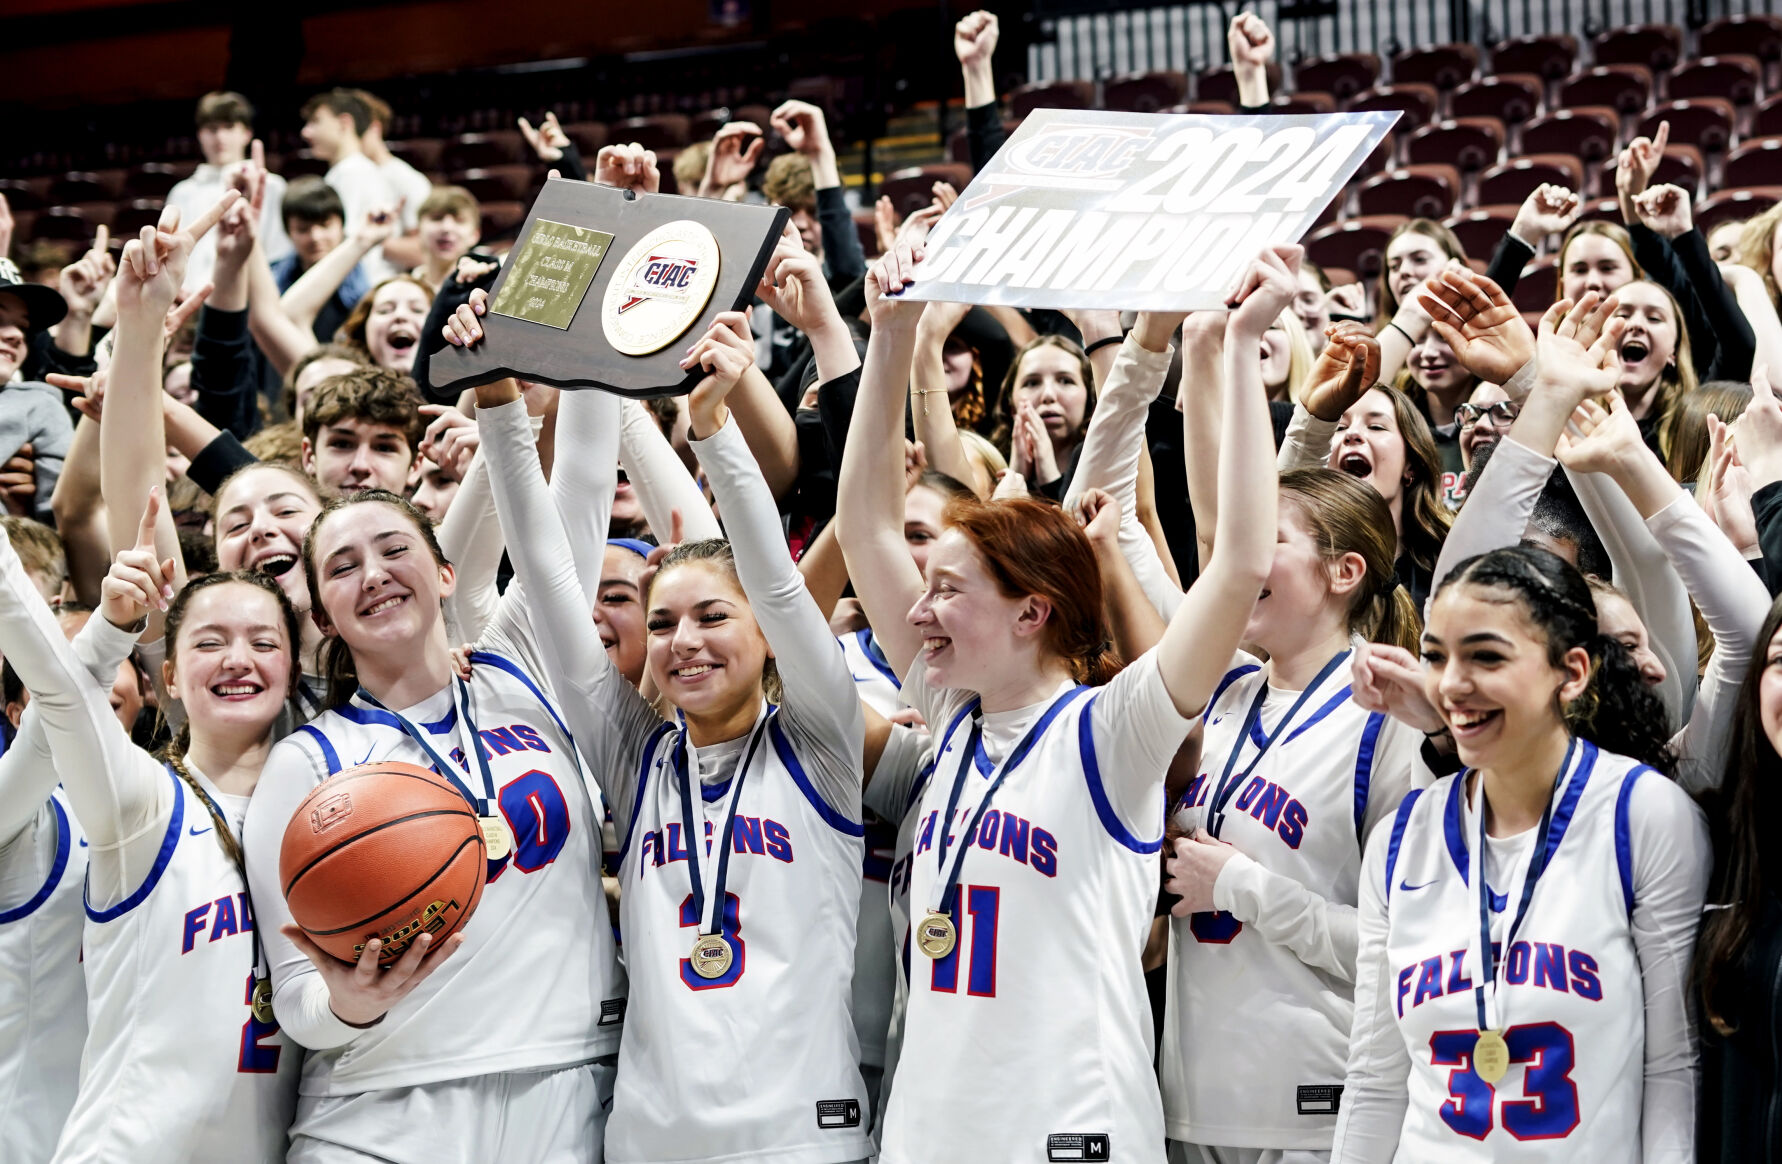 St. Paul Basketball: Kelly, Tice Lead Team to Victorious Class M State Championship Win